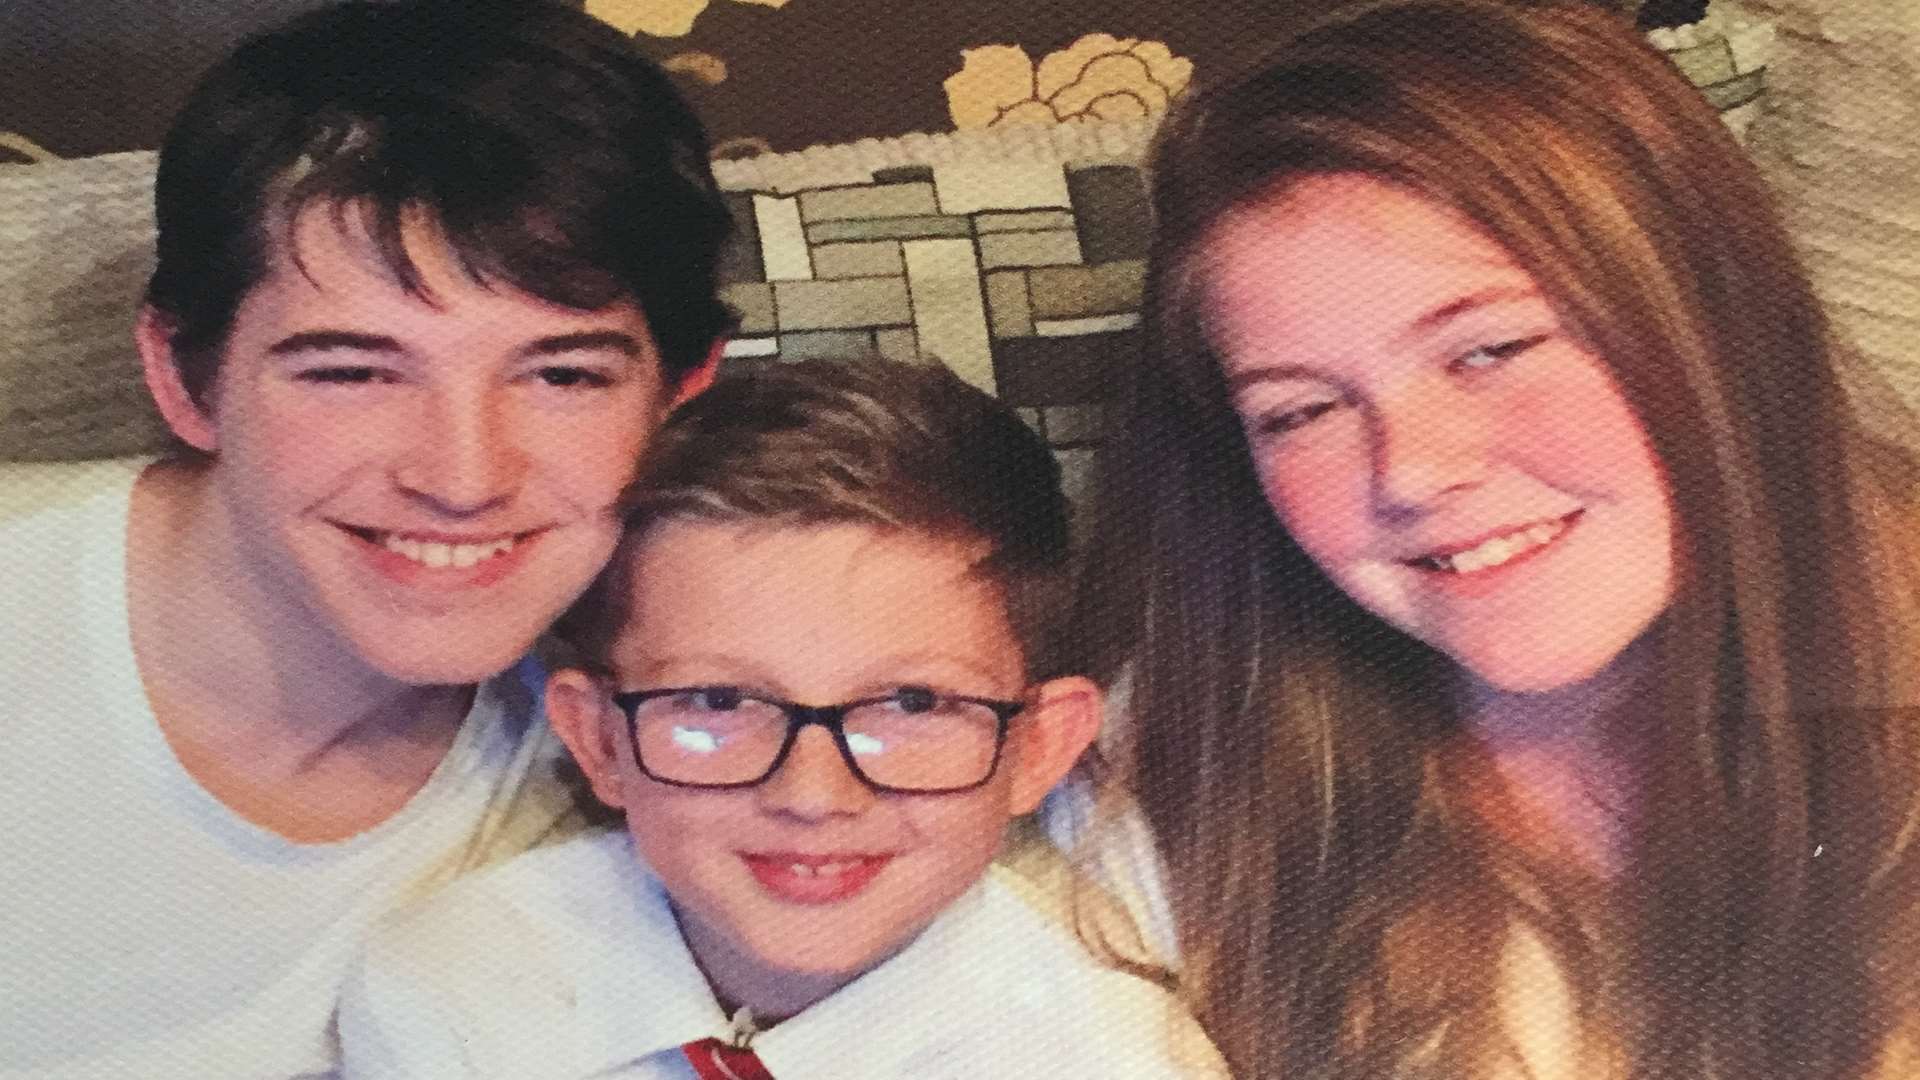 Ethan with his brother Jack, 12, and sister Shannon, 17